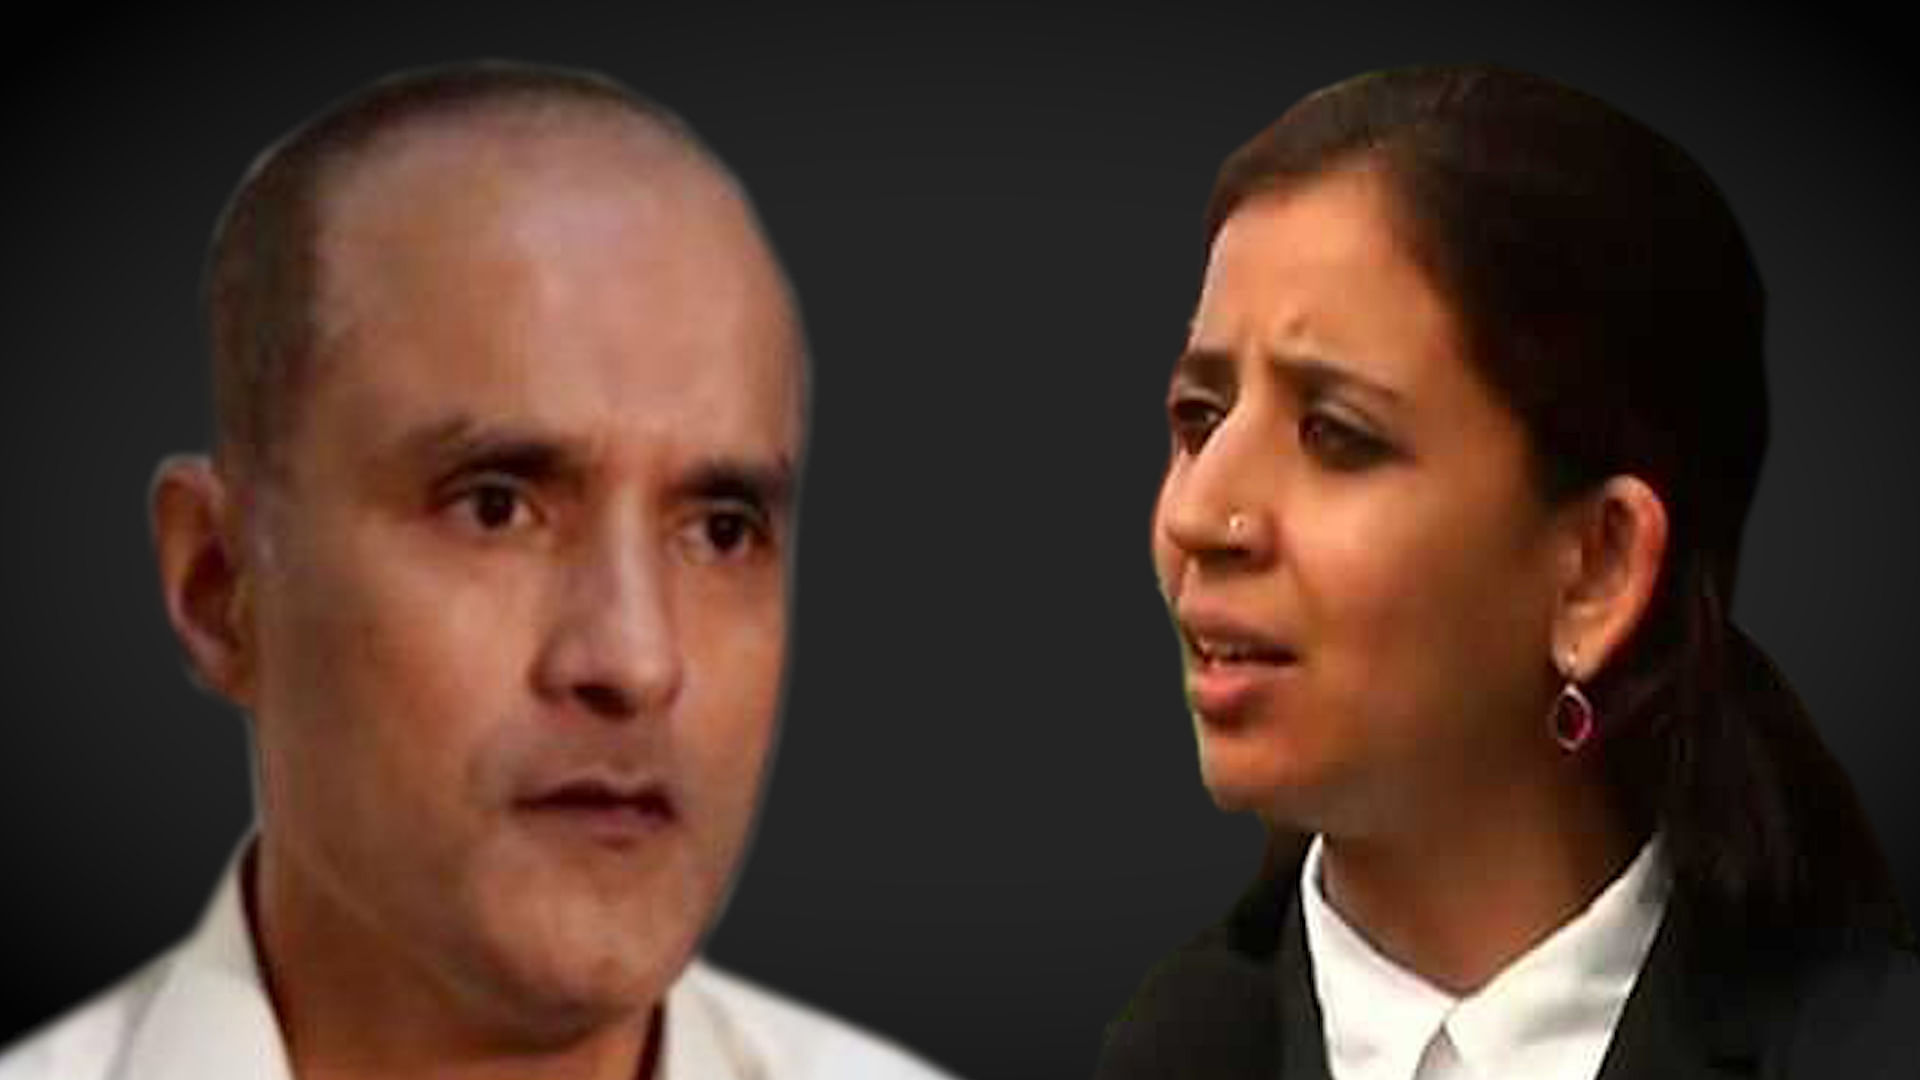 SC lawyer speaks to The Quint on the Kulbhushan Jadhav case heard by the ICJ. (Photo: The Quint)